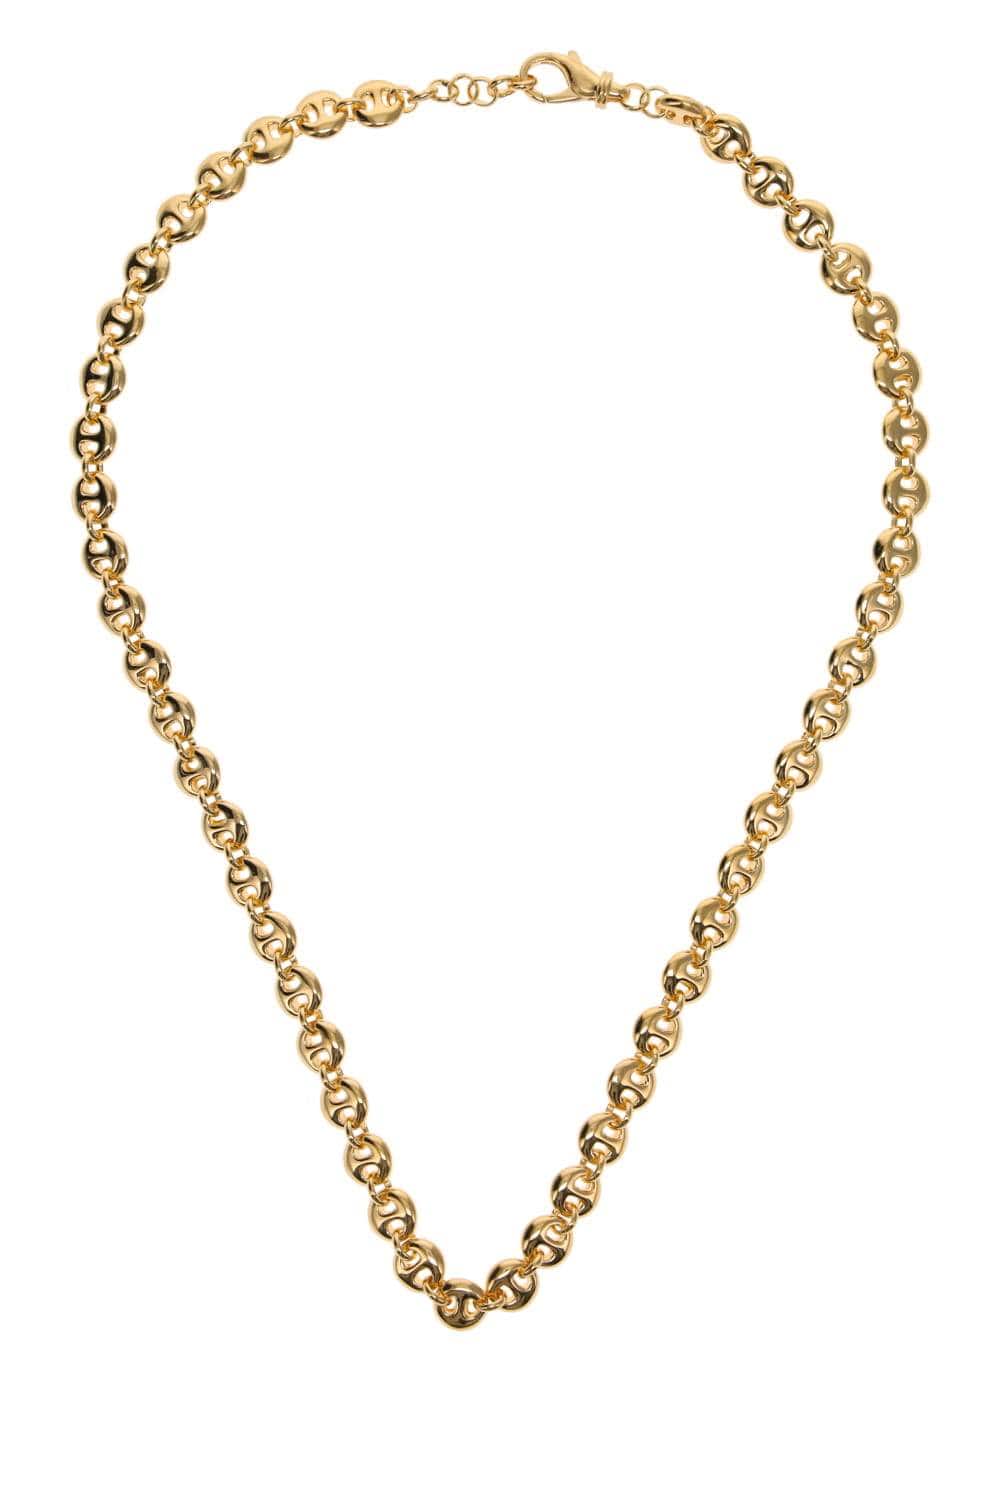 XL Chain Link Necklace | 925 Sterling Silver 23.5